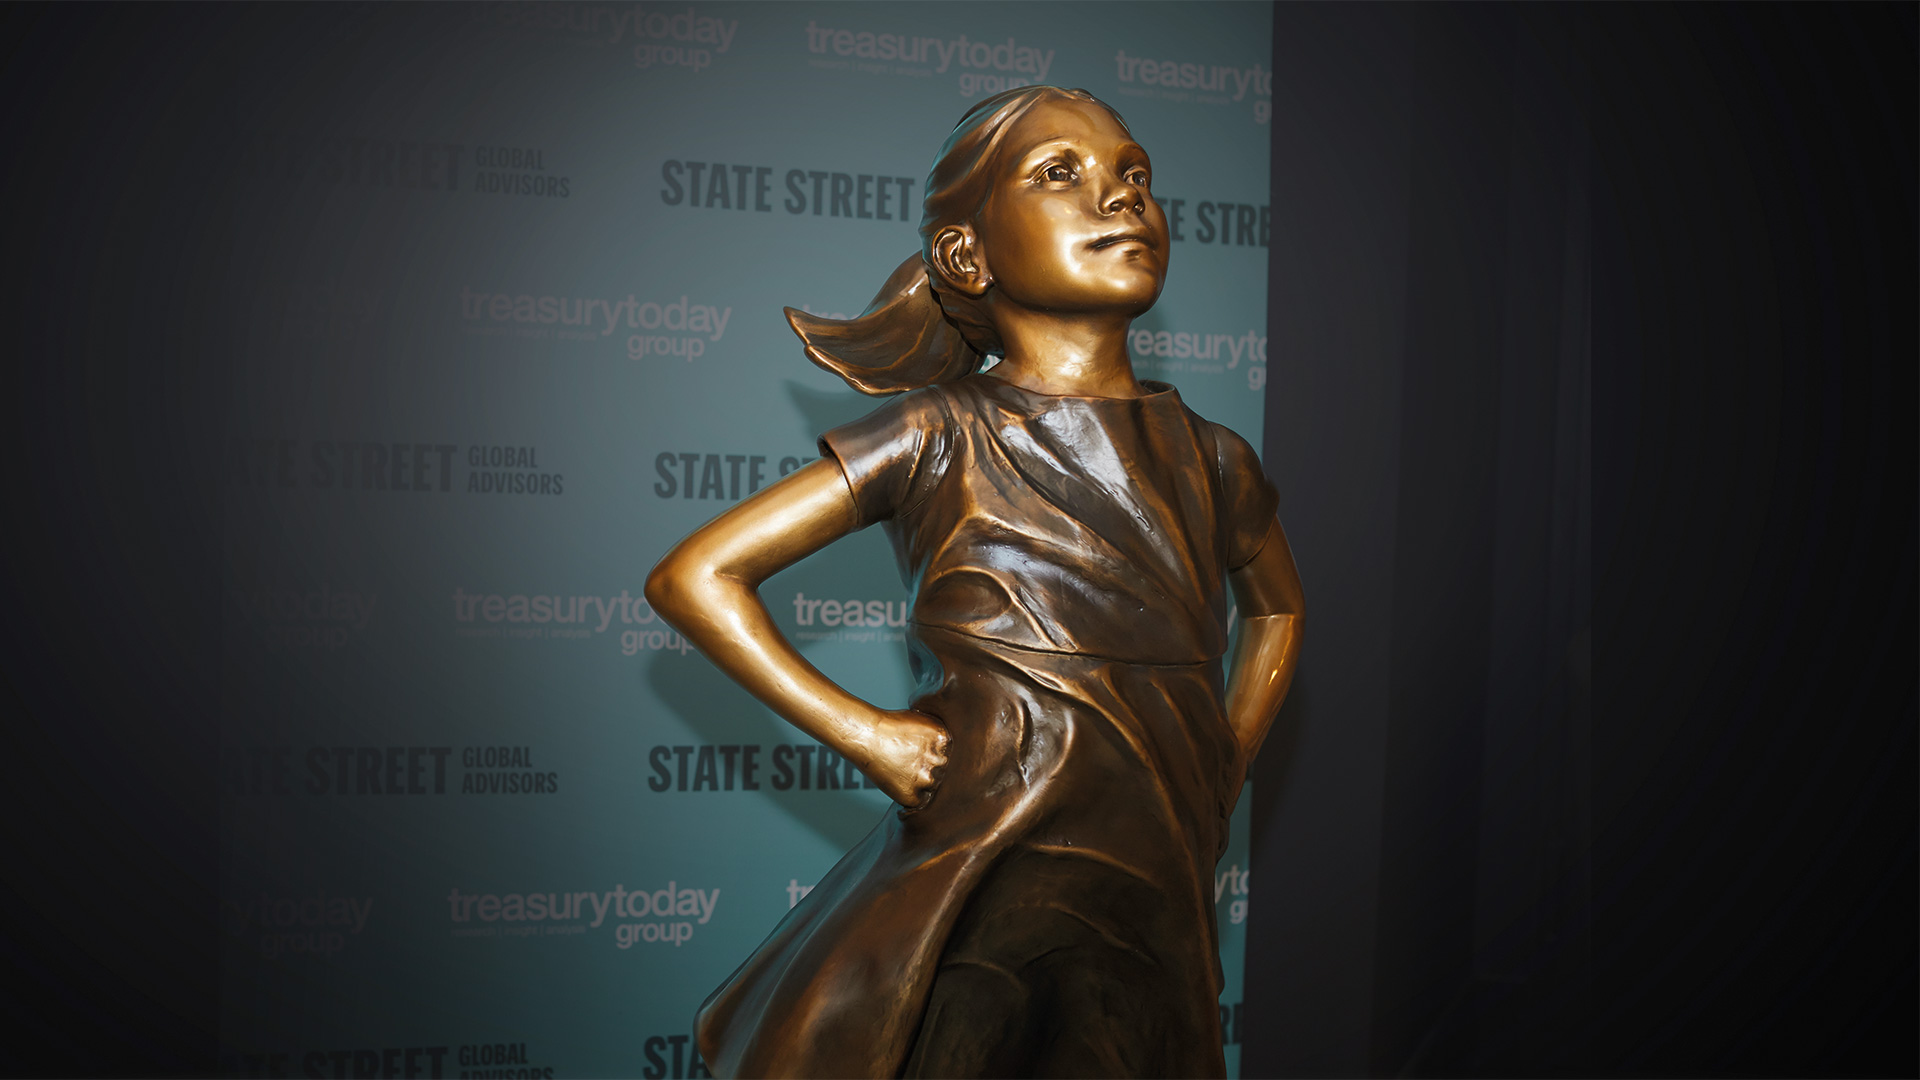 Fearless girl – Sculpture by Kristen Visbal, commissioned by State Street Global Advisors